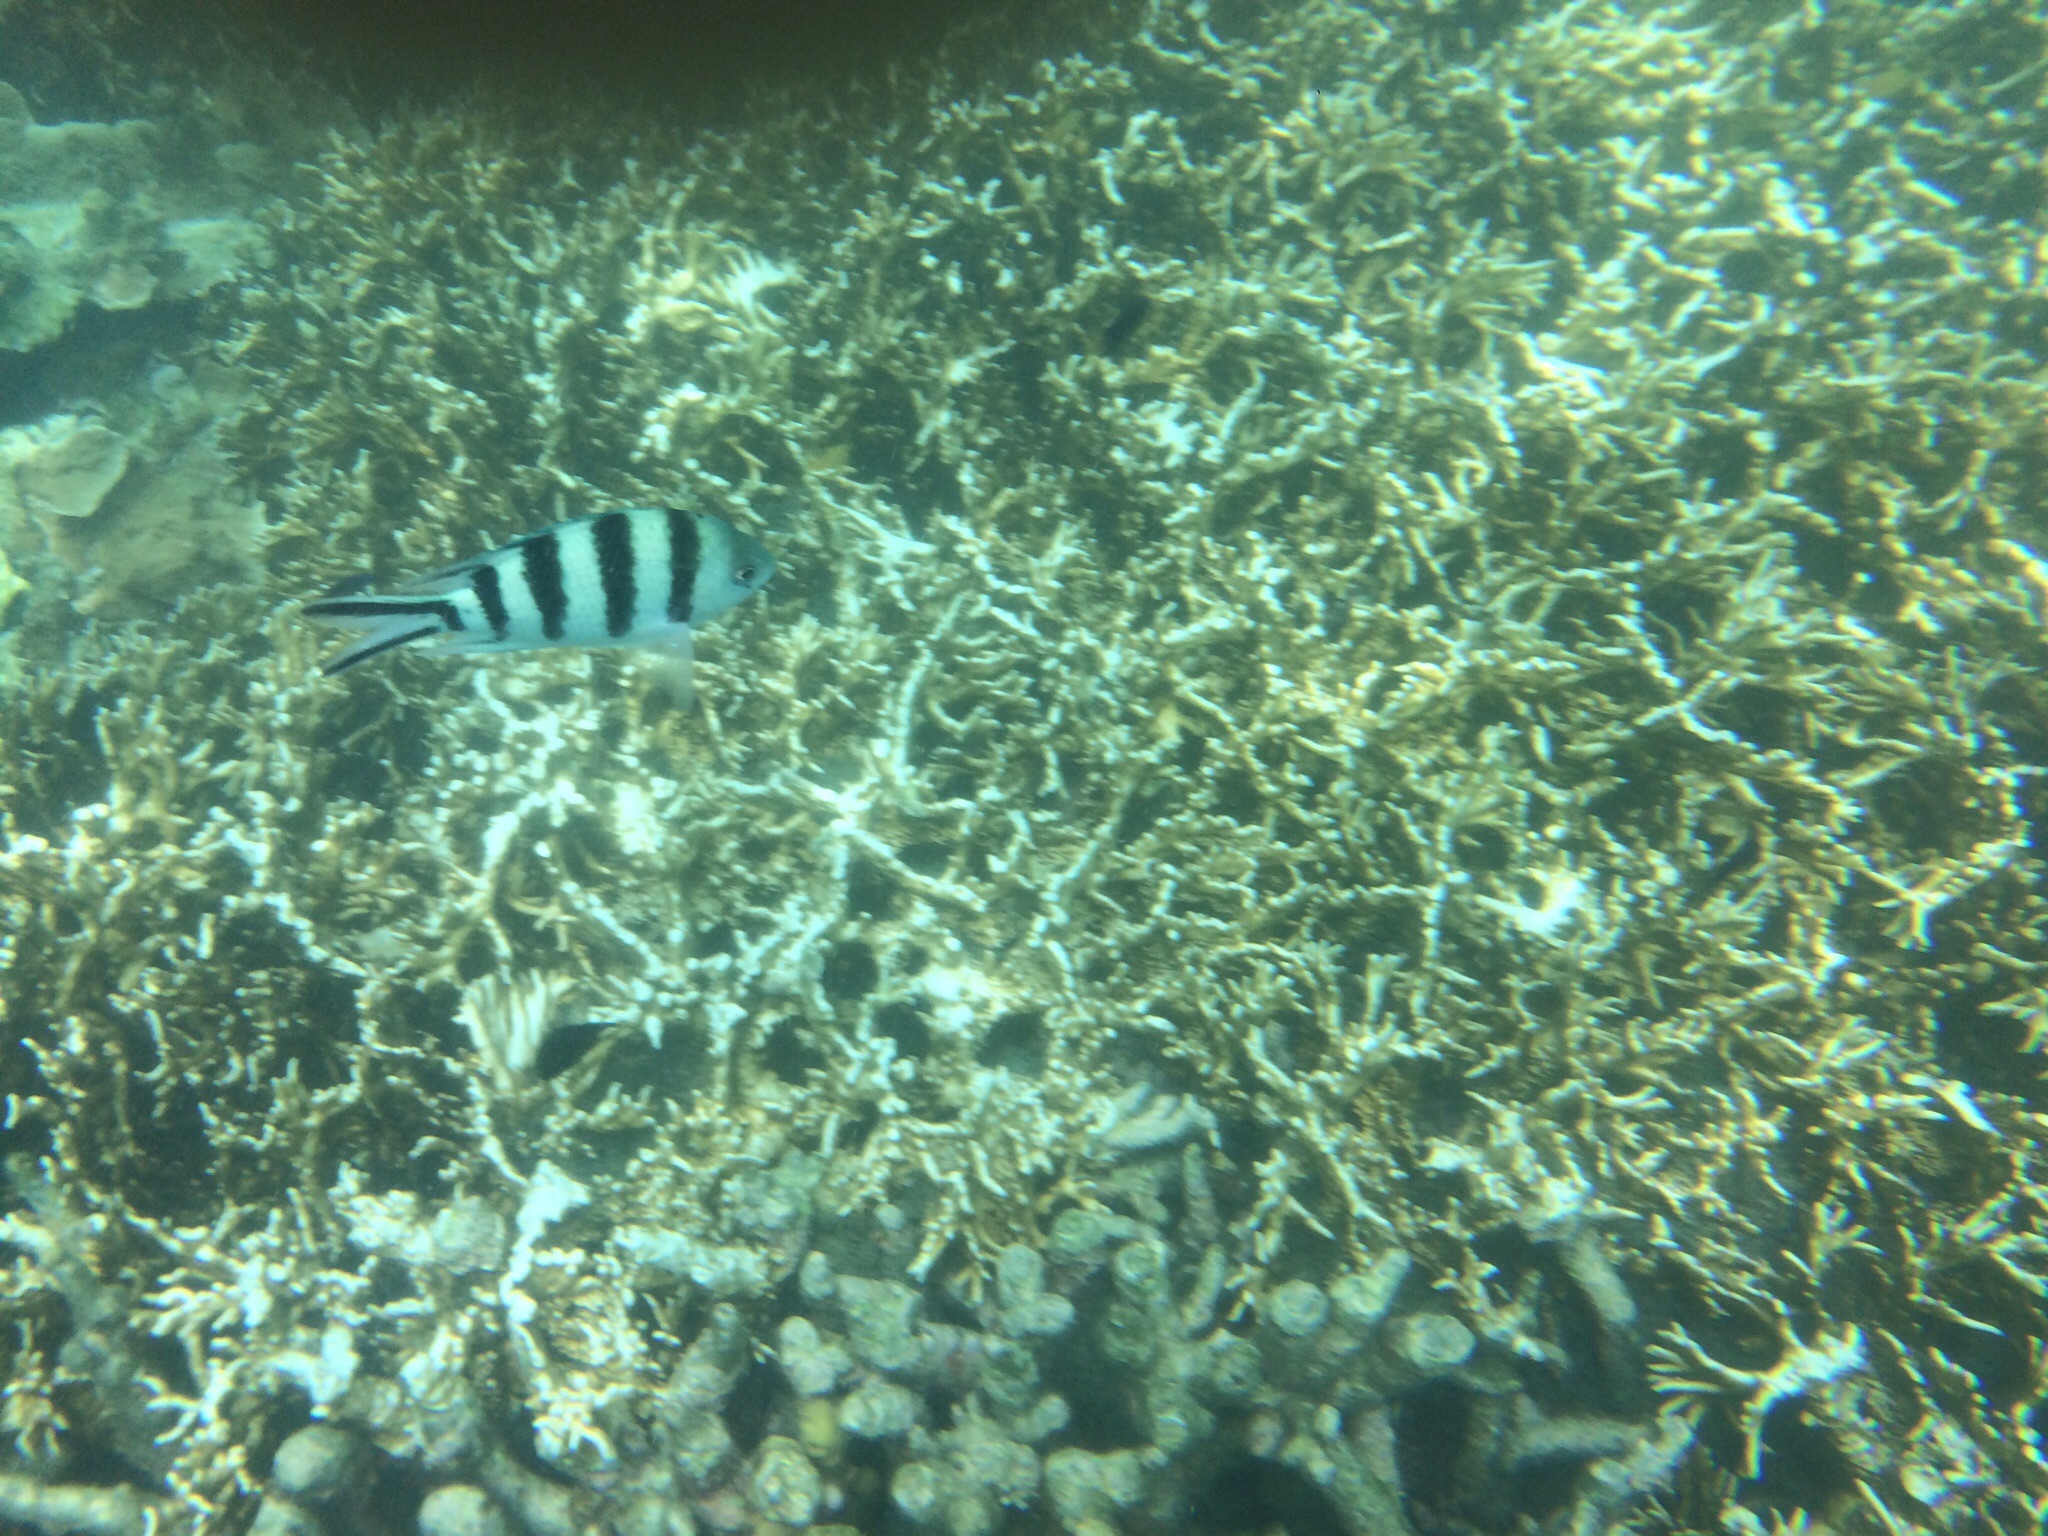 Experimenting with the underwater cover for my iPhone on the Great Barrier Reef. I'm too slow to take pictures of the many fish we saw, so here just one :-)